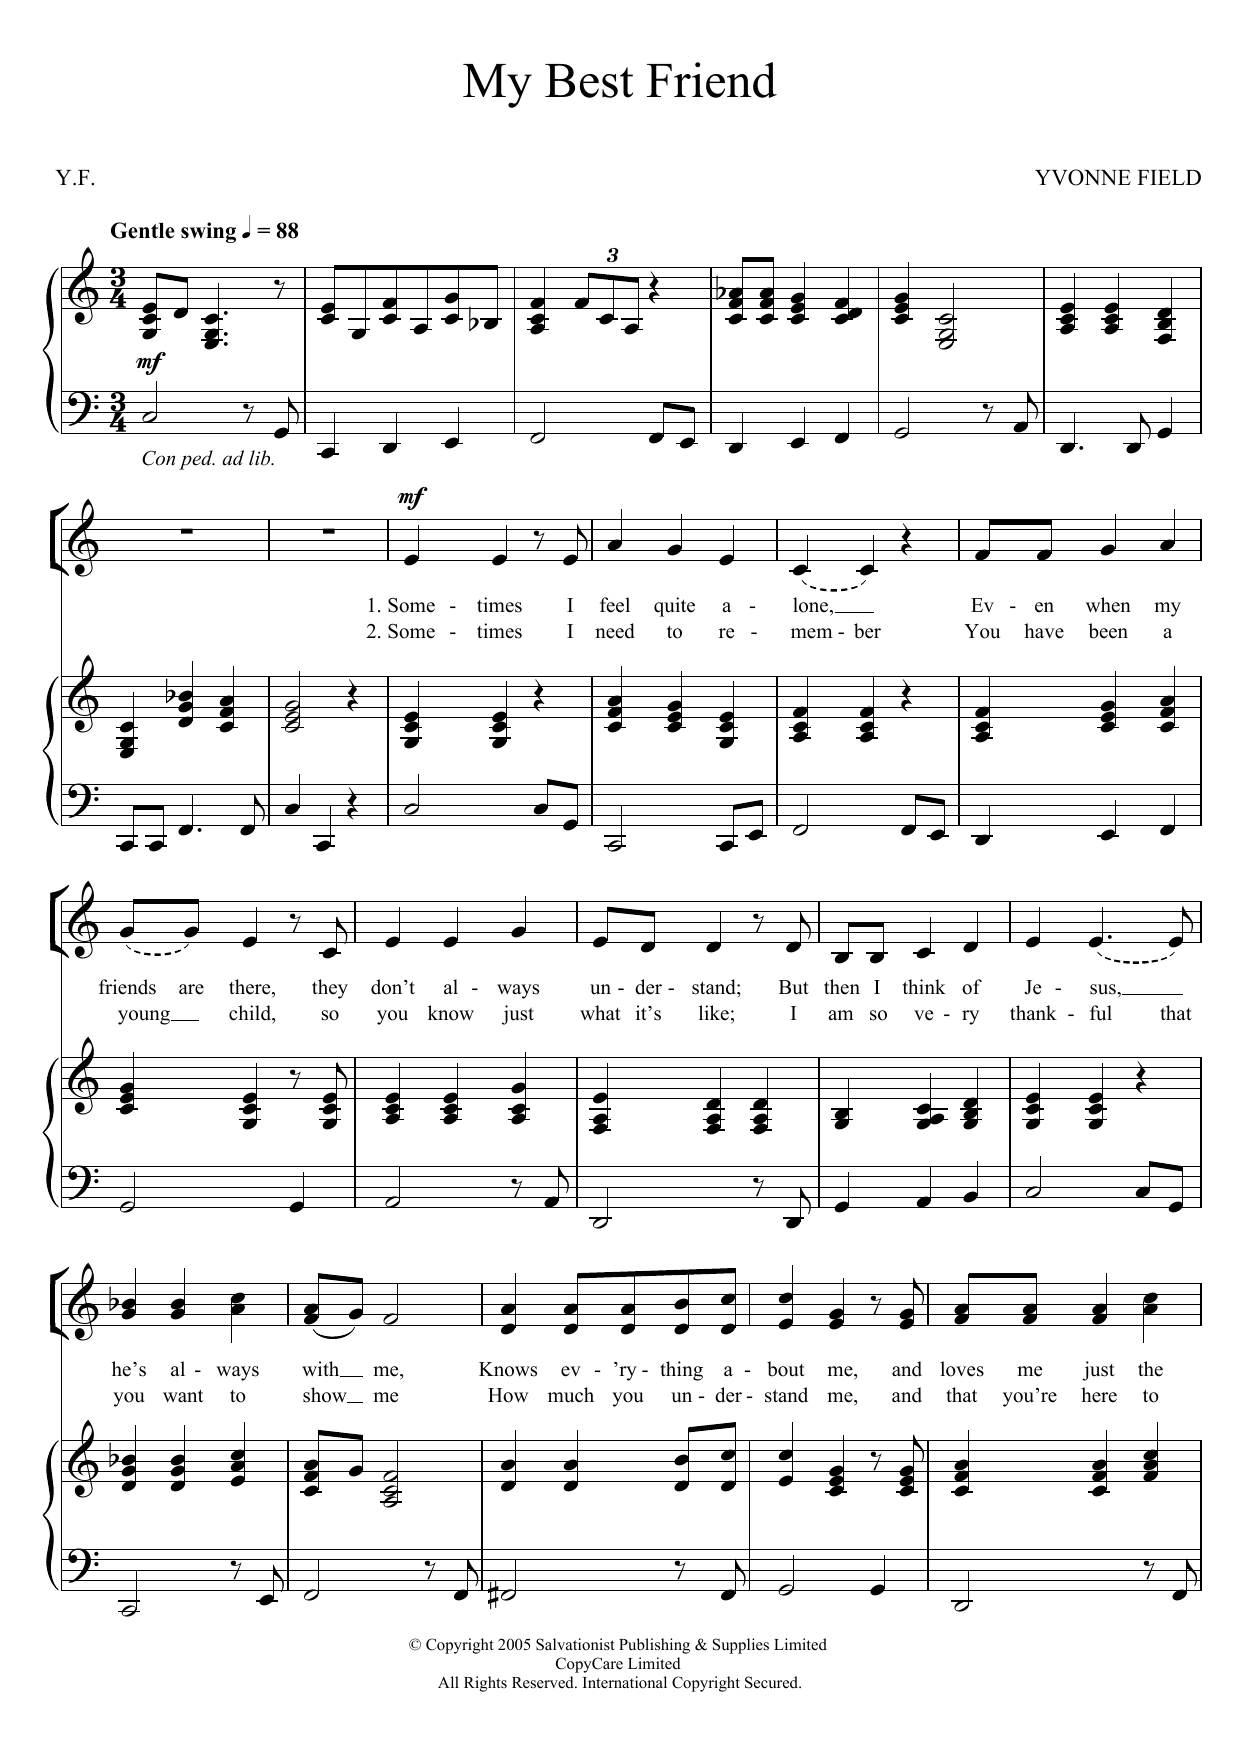 Download The Salvation Army My Best Friend Sheet Music